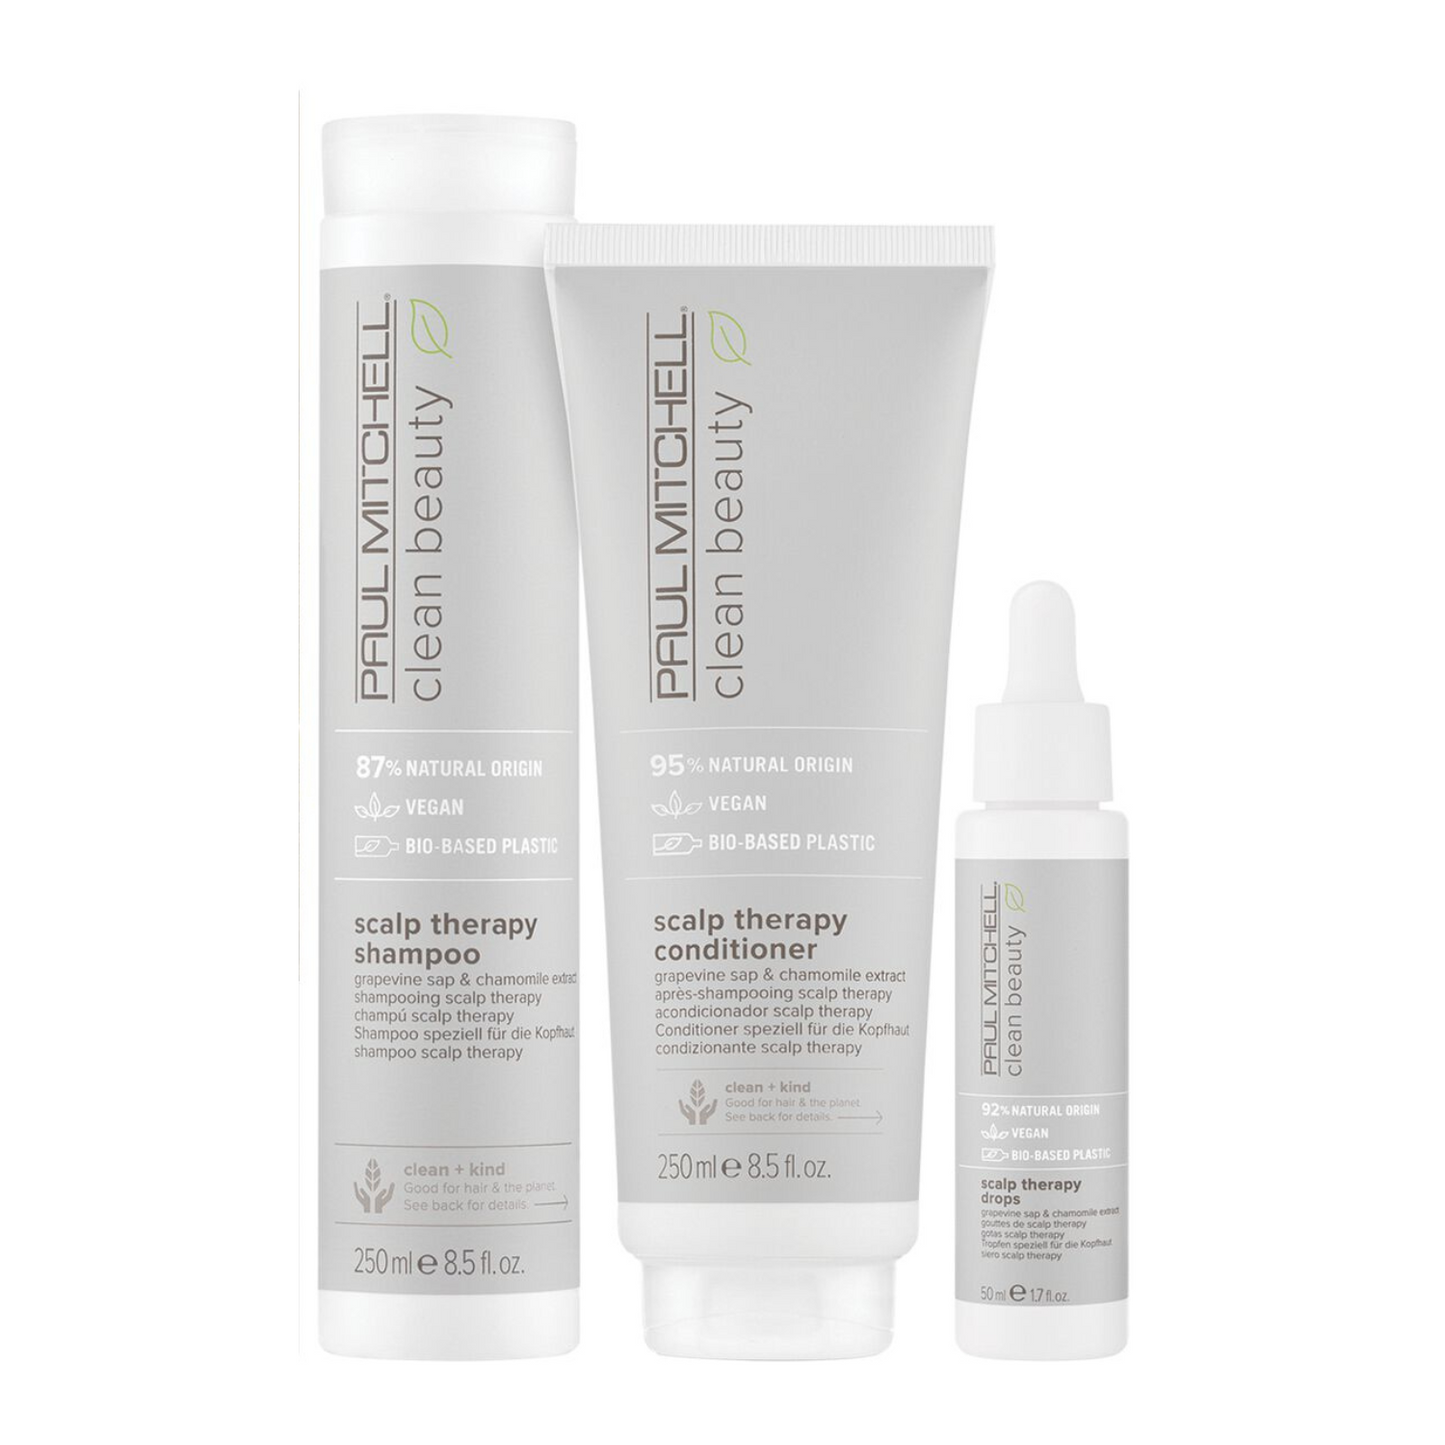 Paul Mitchell Clean Beauty Scalp Therapy Gift Set